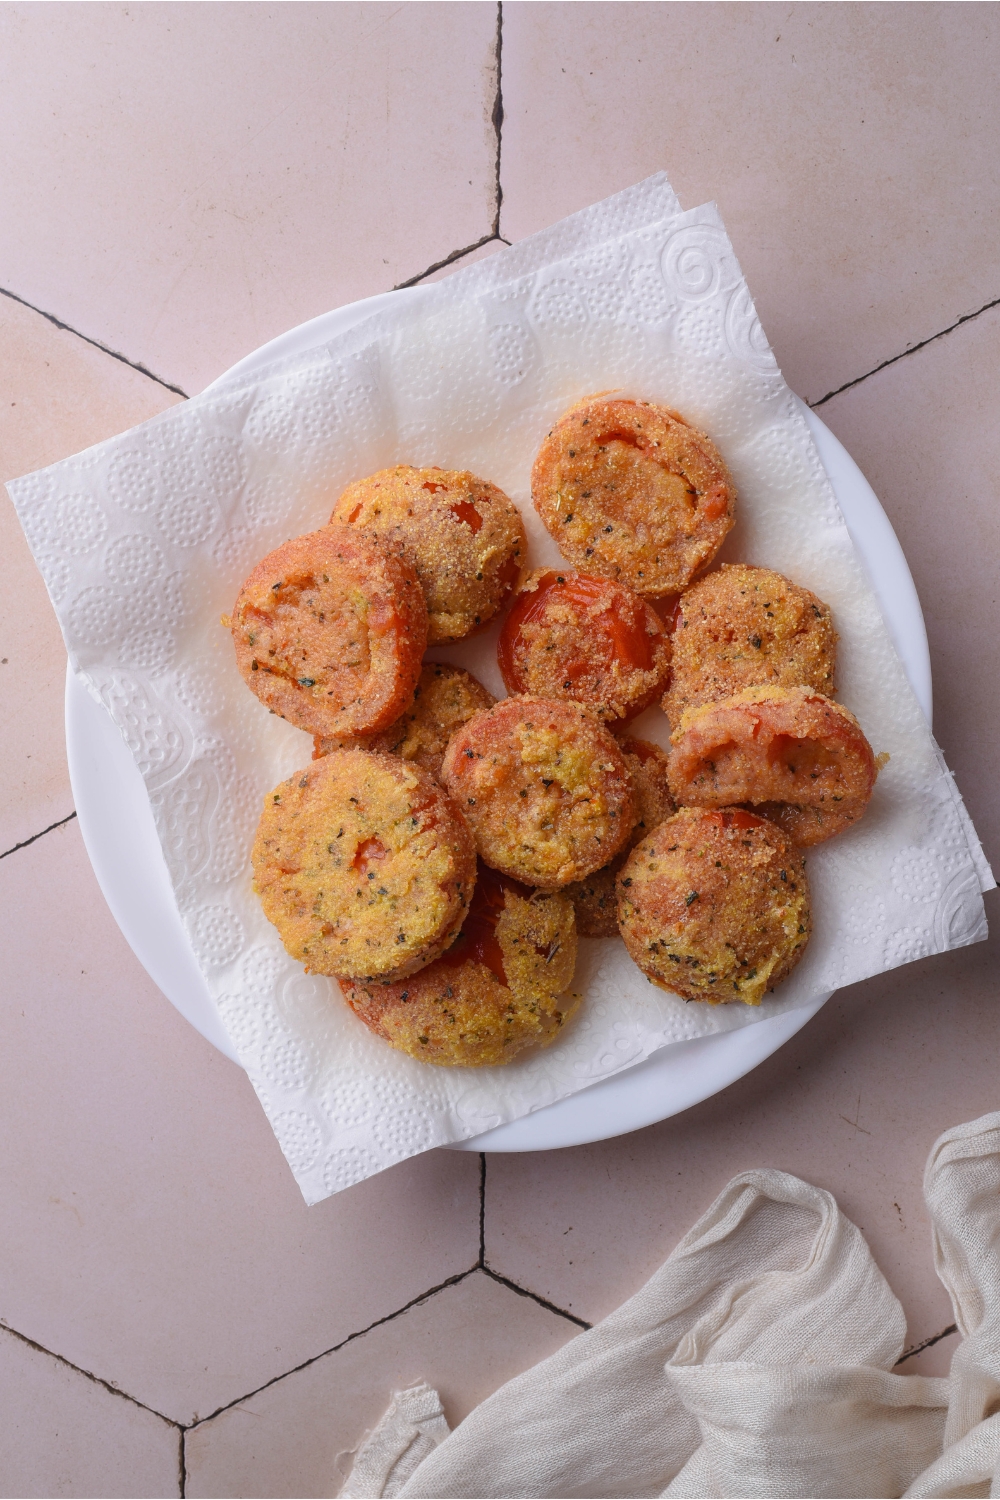 A pile of fried red tomatoes on a plate lined with paper towels.